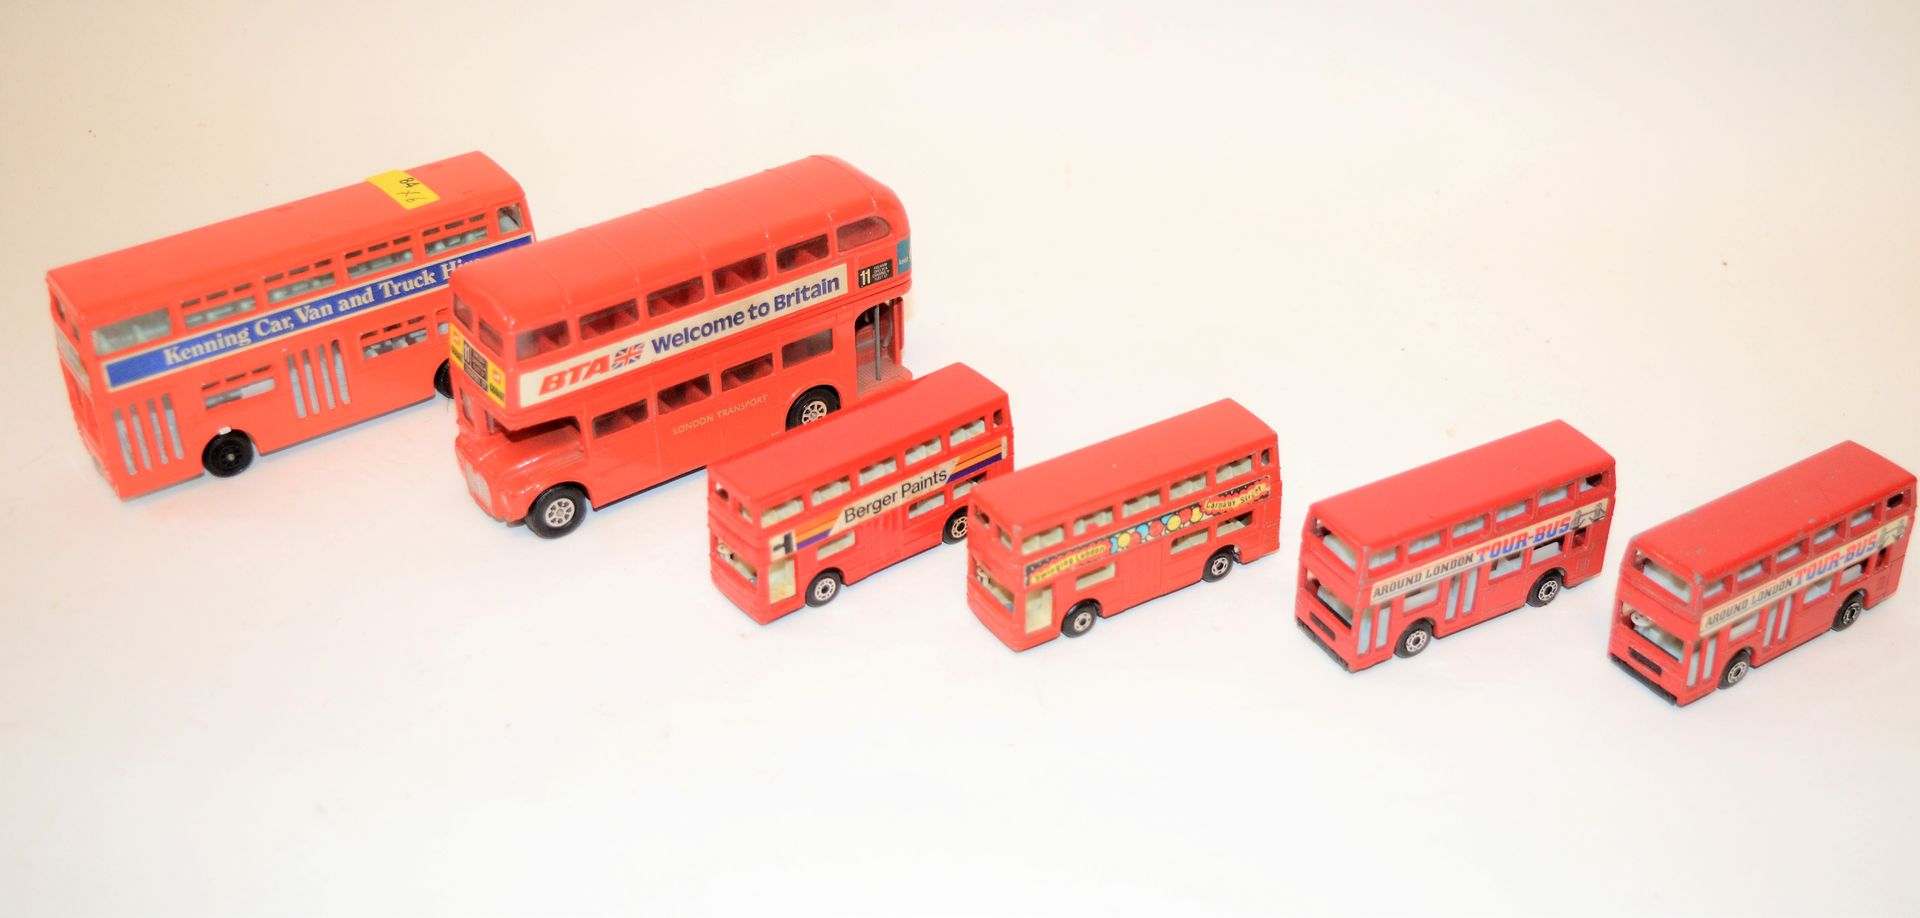 Null Set of 6 English imperial buses:

-GORGI "London transport routemaster

-DI&hellip;